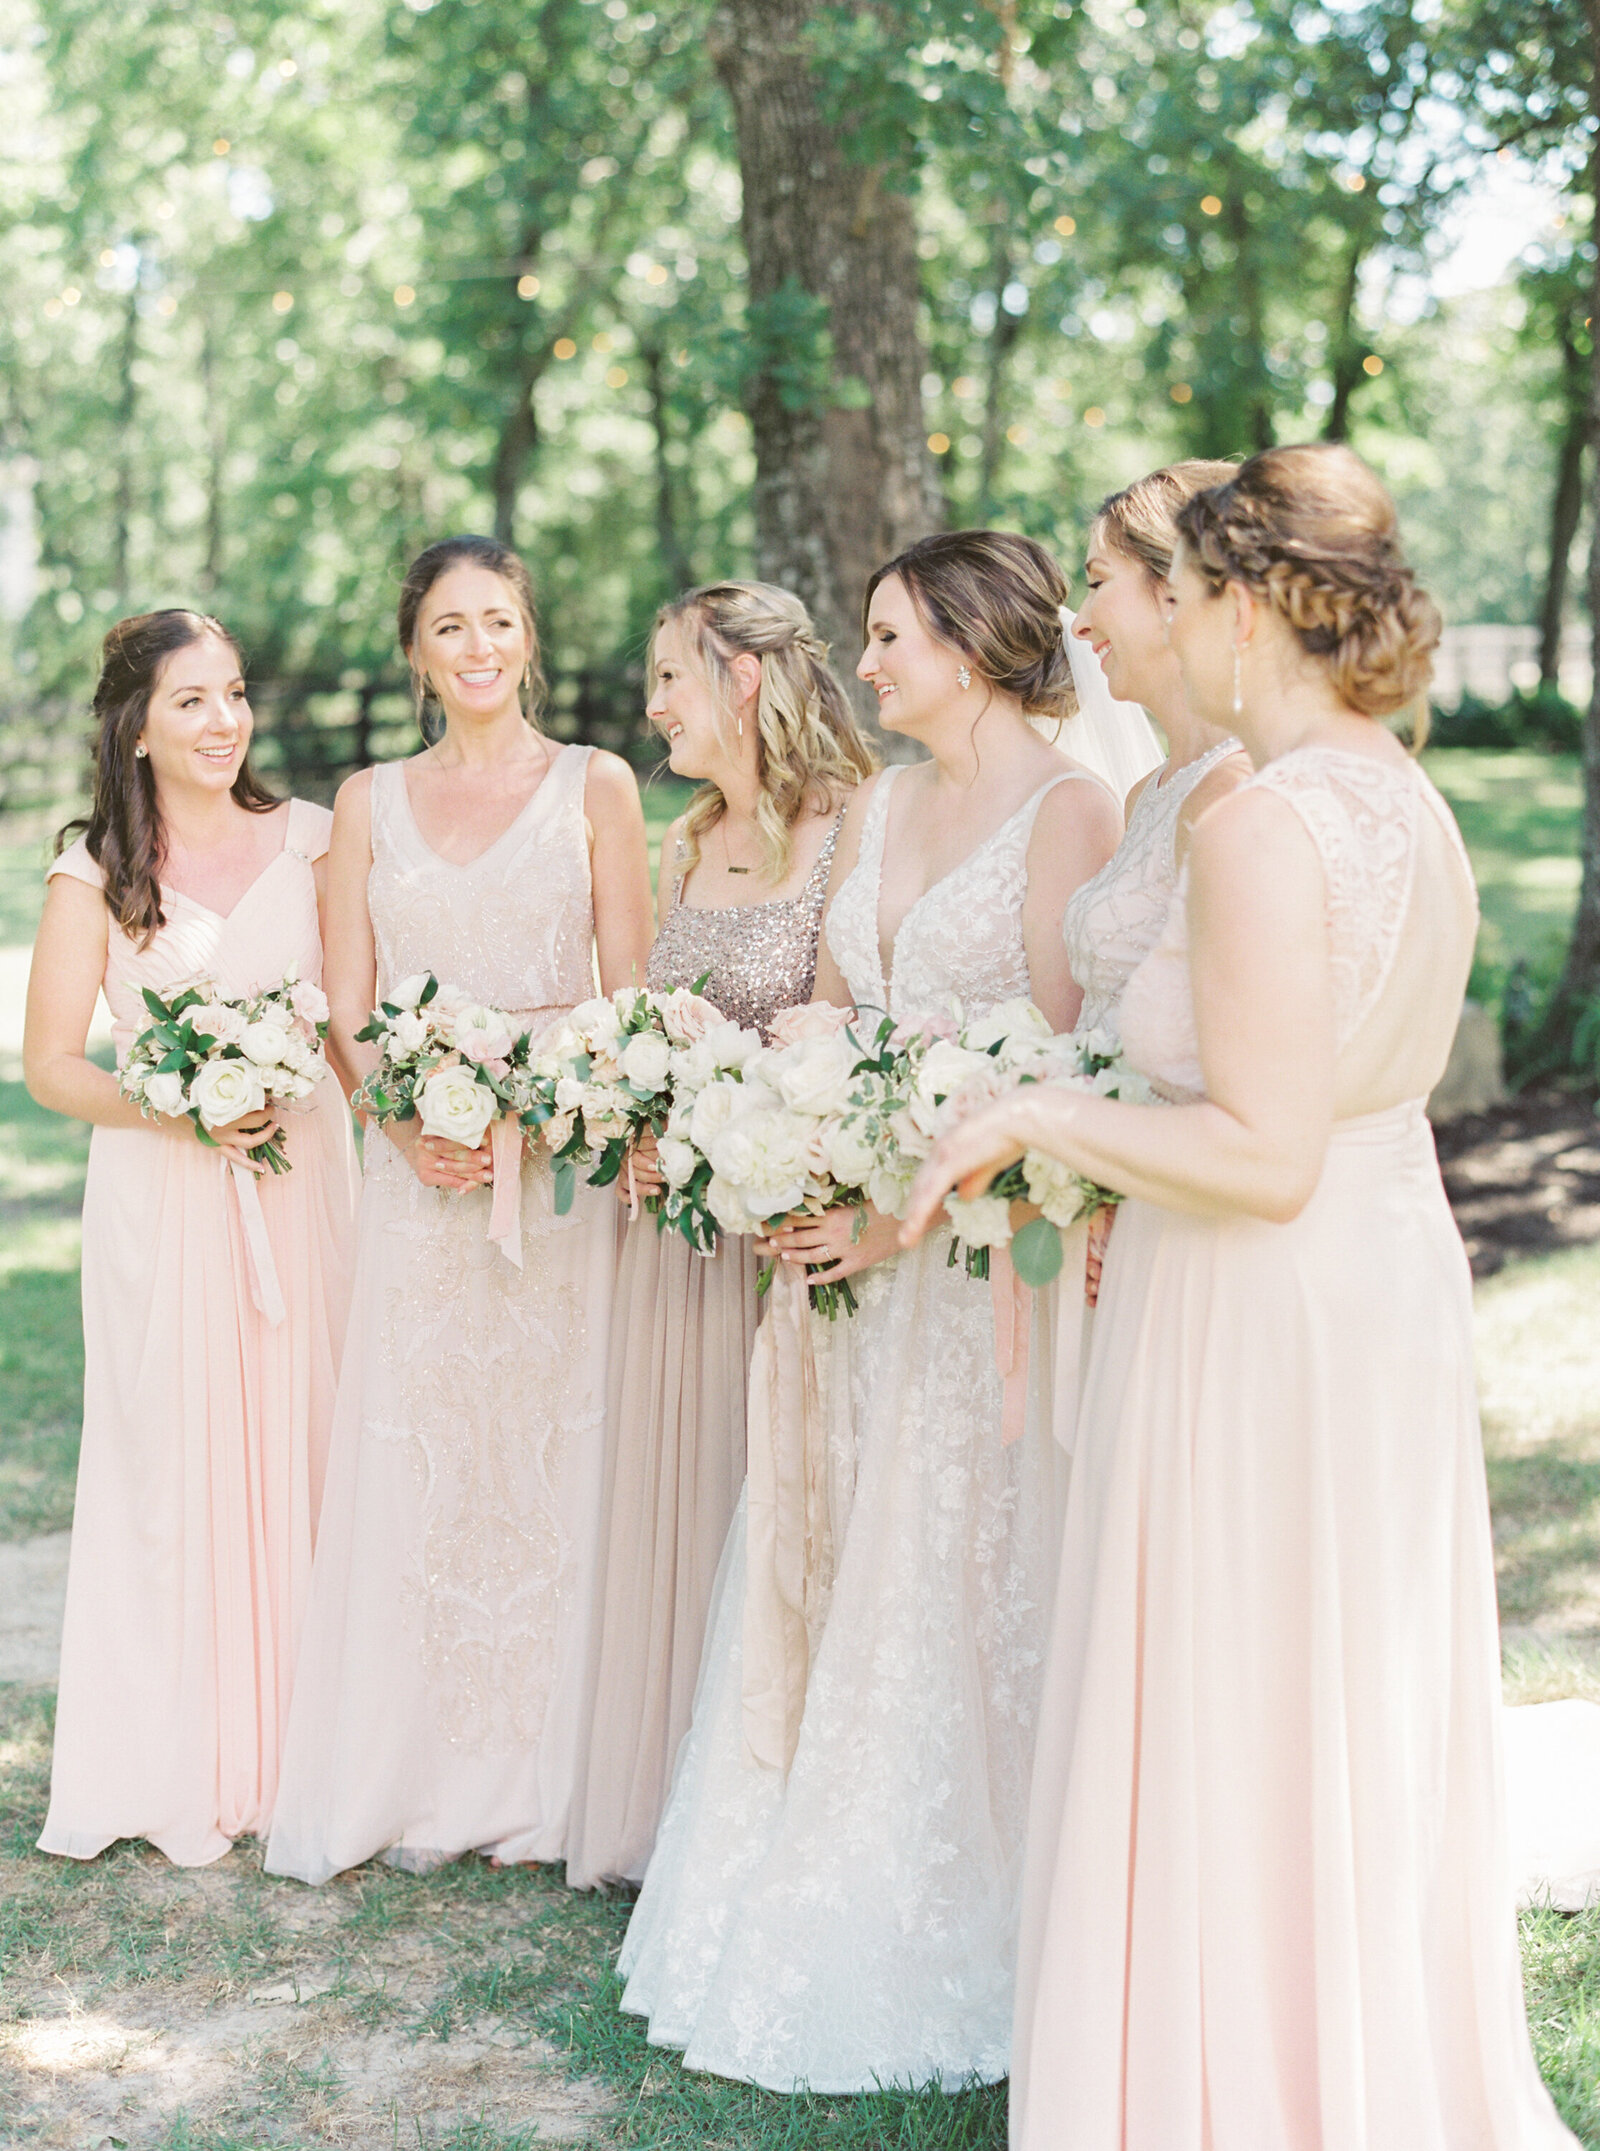 White Sparrow Barn_Lindsay and Scott_Madeline Trent Photography-0057